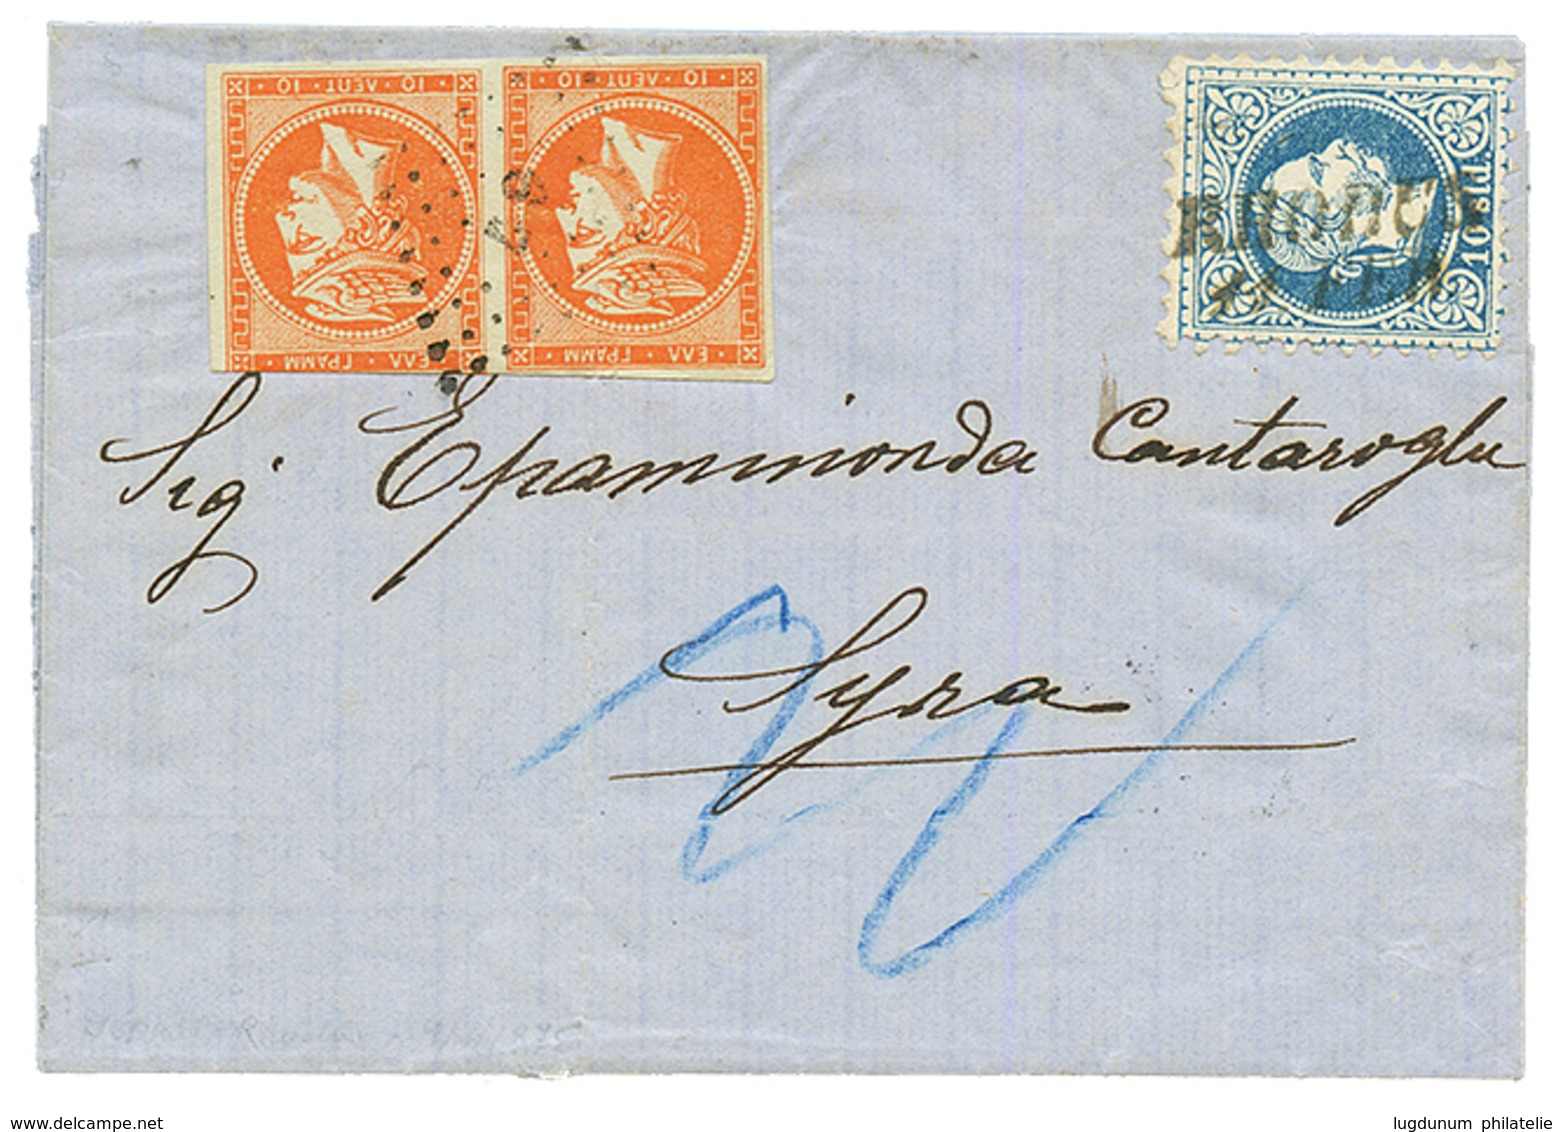 GREECE : 1875 10 SOLDI Canc. RHODUS + GRECE Pair 10l (1 Stamp Cut) Canc. 67 On Entire Letter To SYRA. MIXT Franking From - Levante-Marken